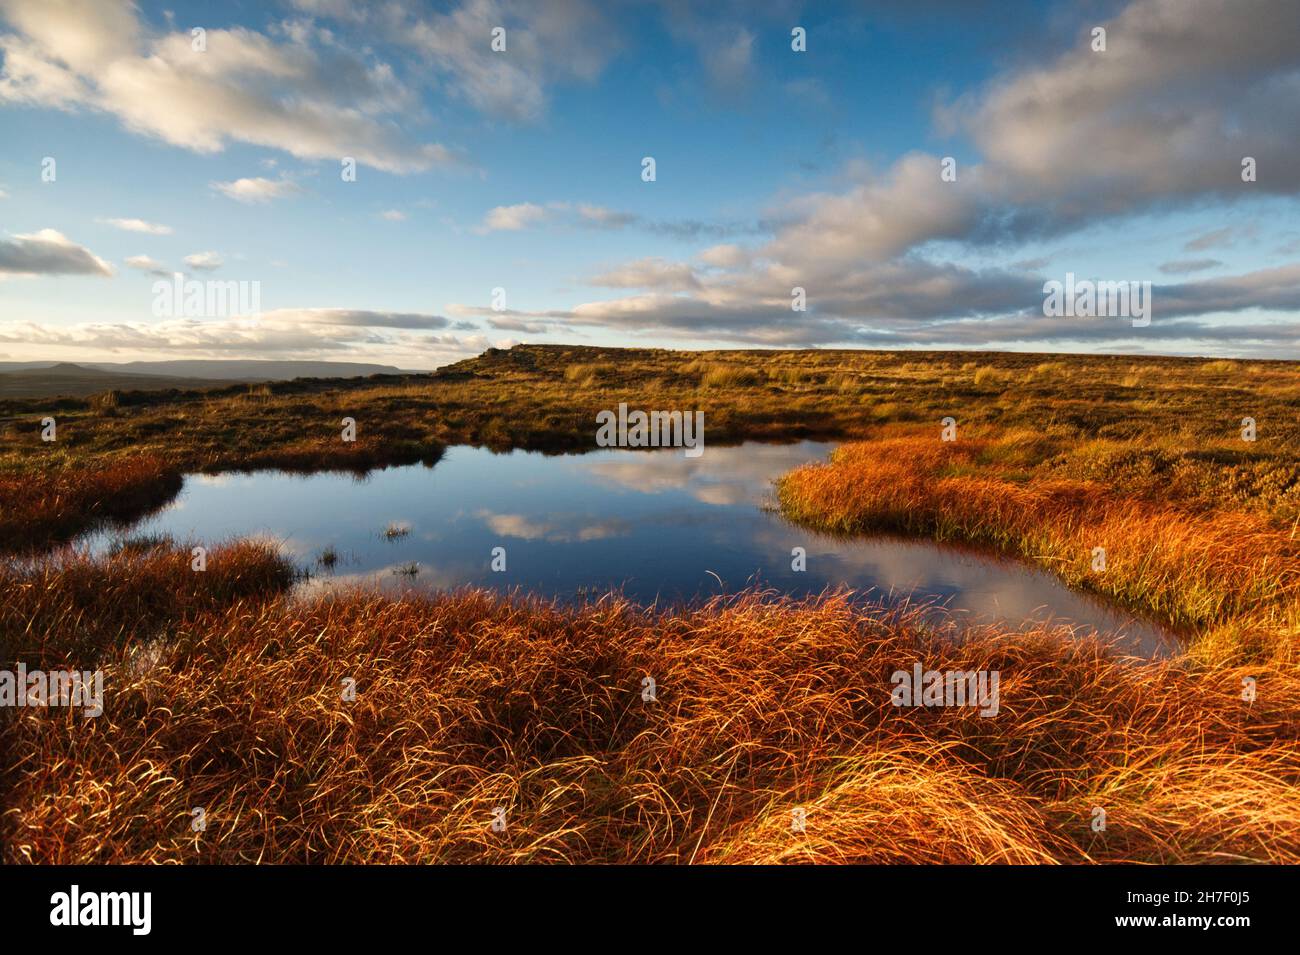 Sunset on Stanage Edge in the Peak District National Park. Reflections of the sky in standing water mirror the scene. Stock Photo